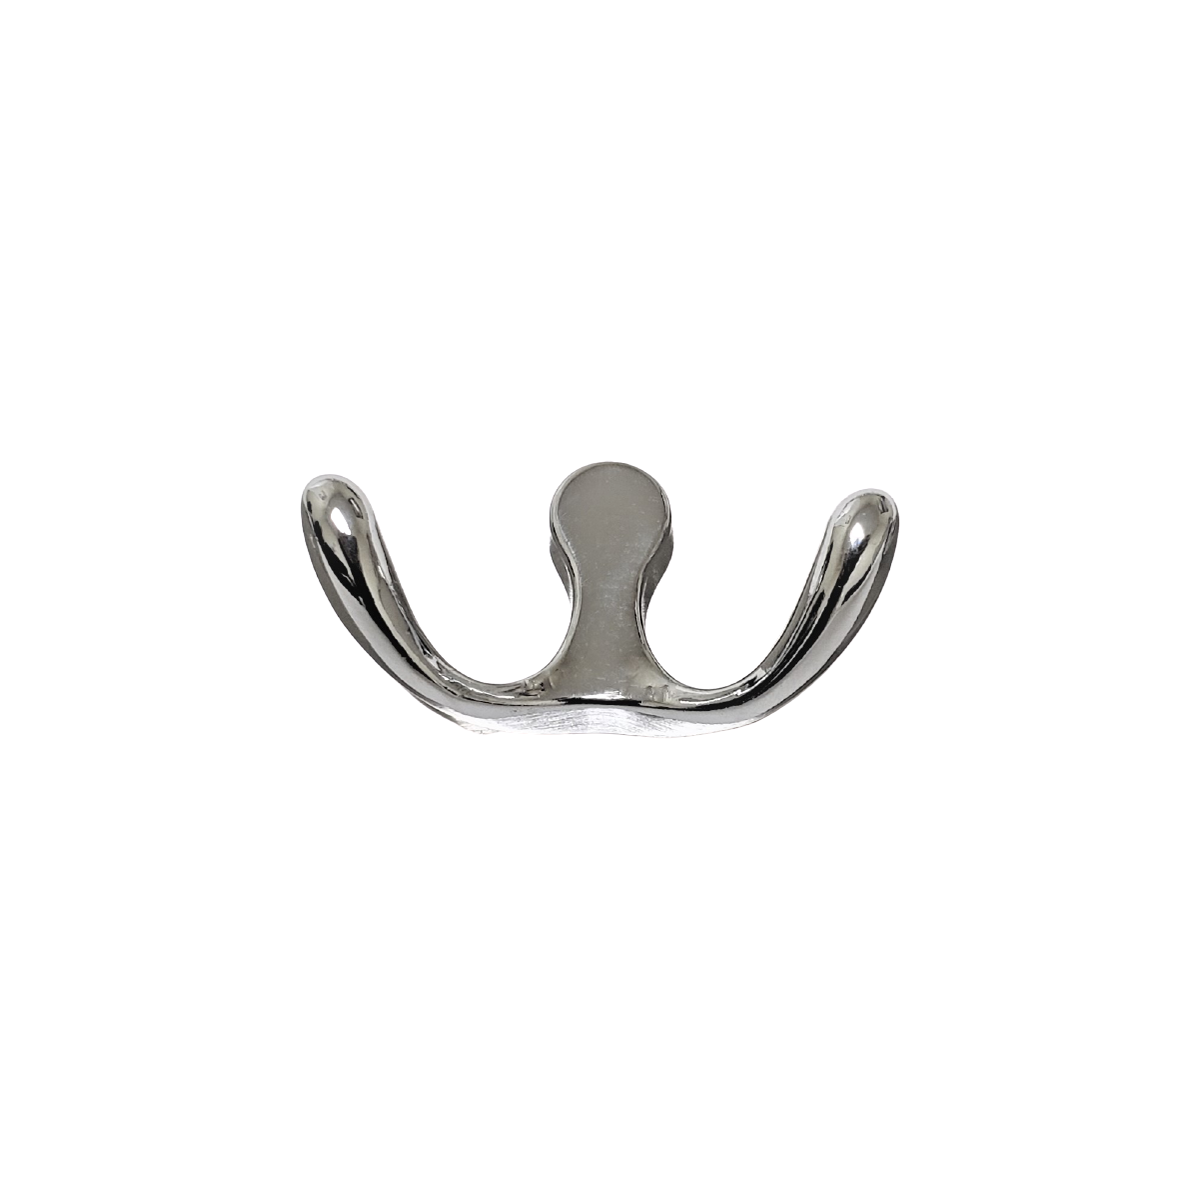 https://www.primadecorativehardware.com/wp-content/uploads/2020/10/Coat-Rack-Hook-Stainless-Steel-Wall-Mounted-Single.png